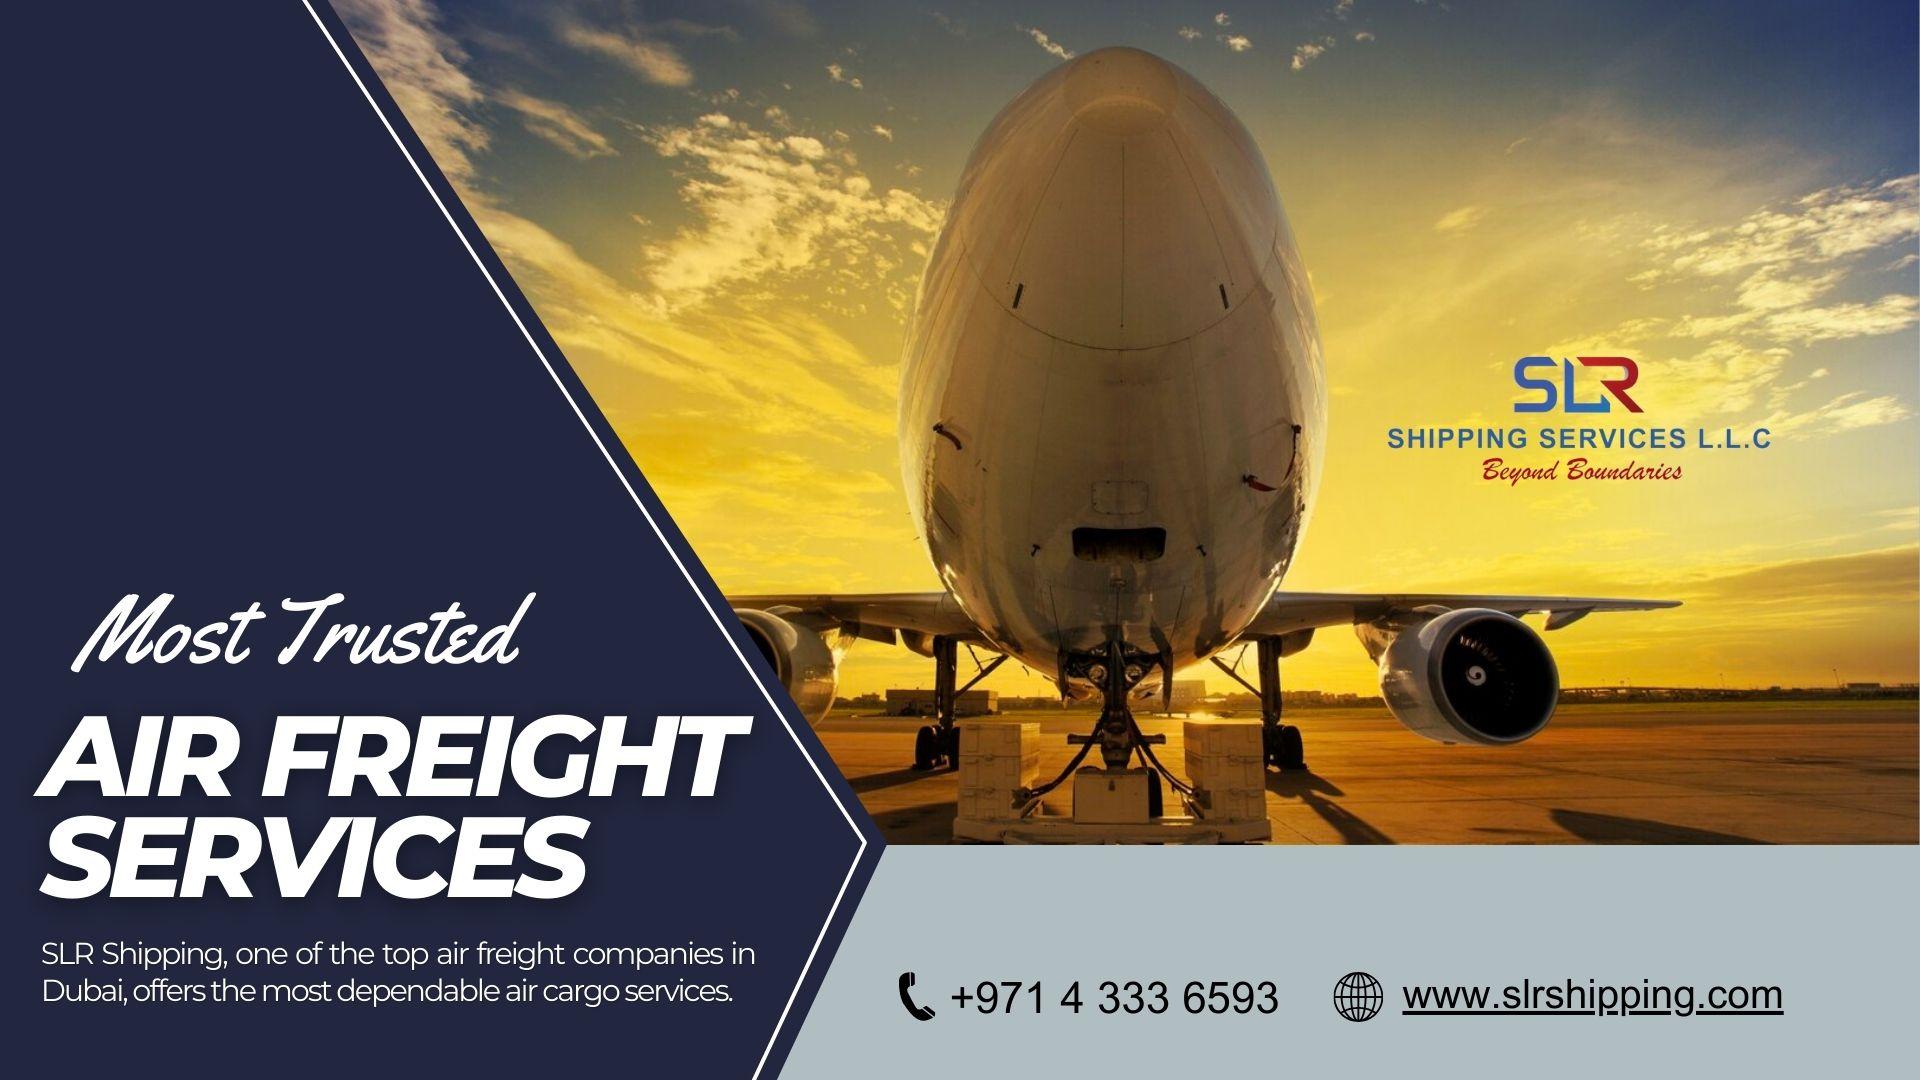 Air Freight Services with Shipment Tracking by SLR